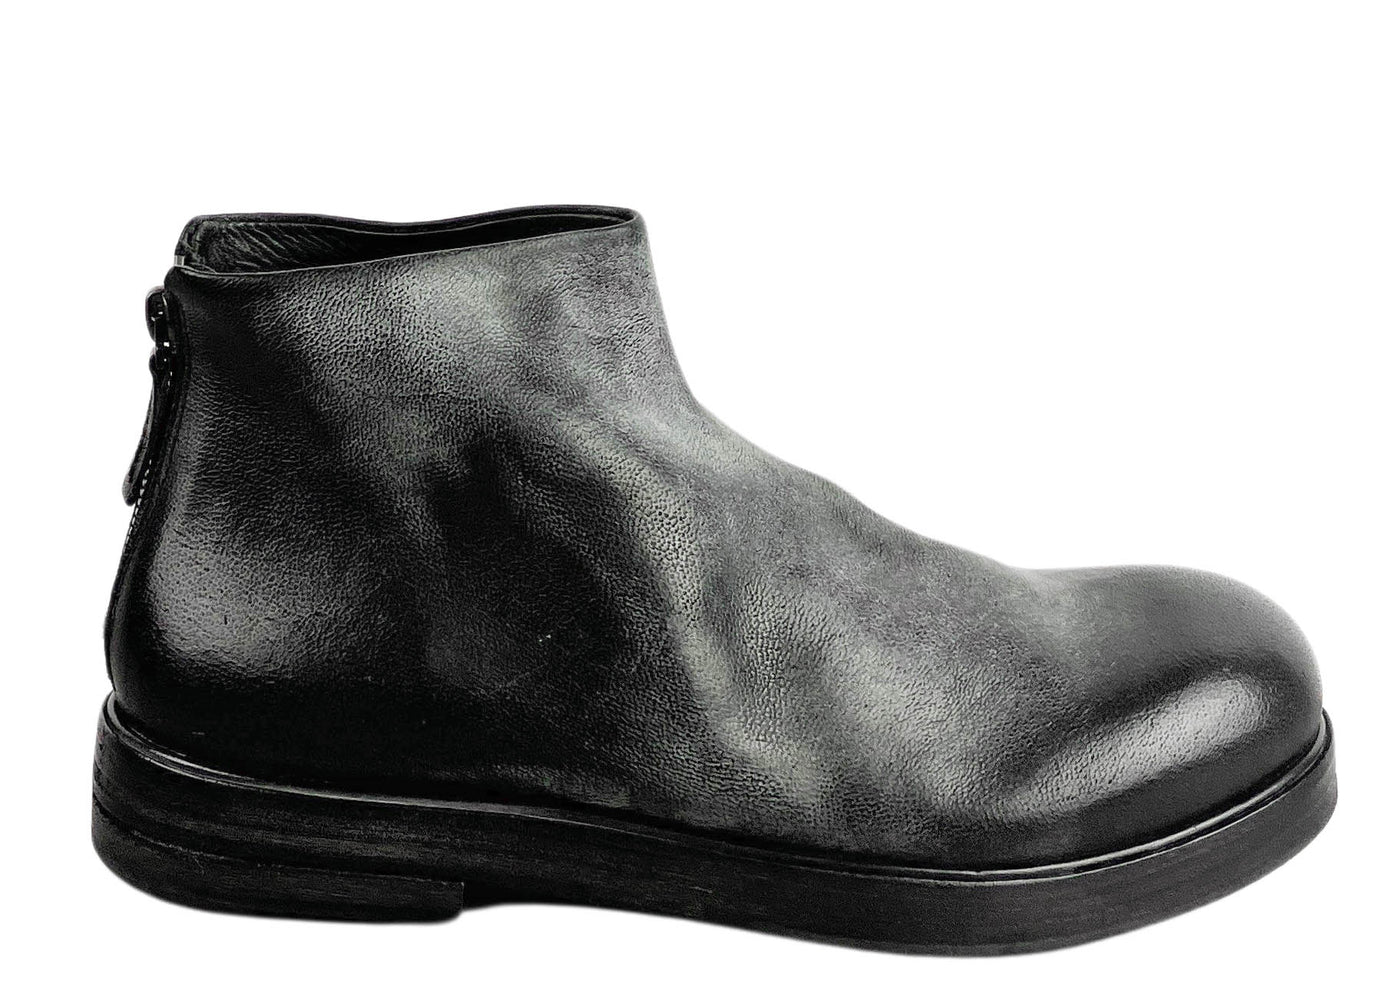 Marsell Round Toe Ankle Boots in Black - Discounts on Marsell at UAL